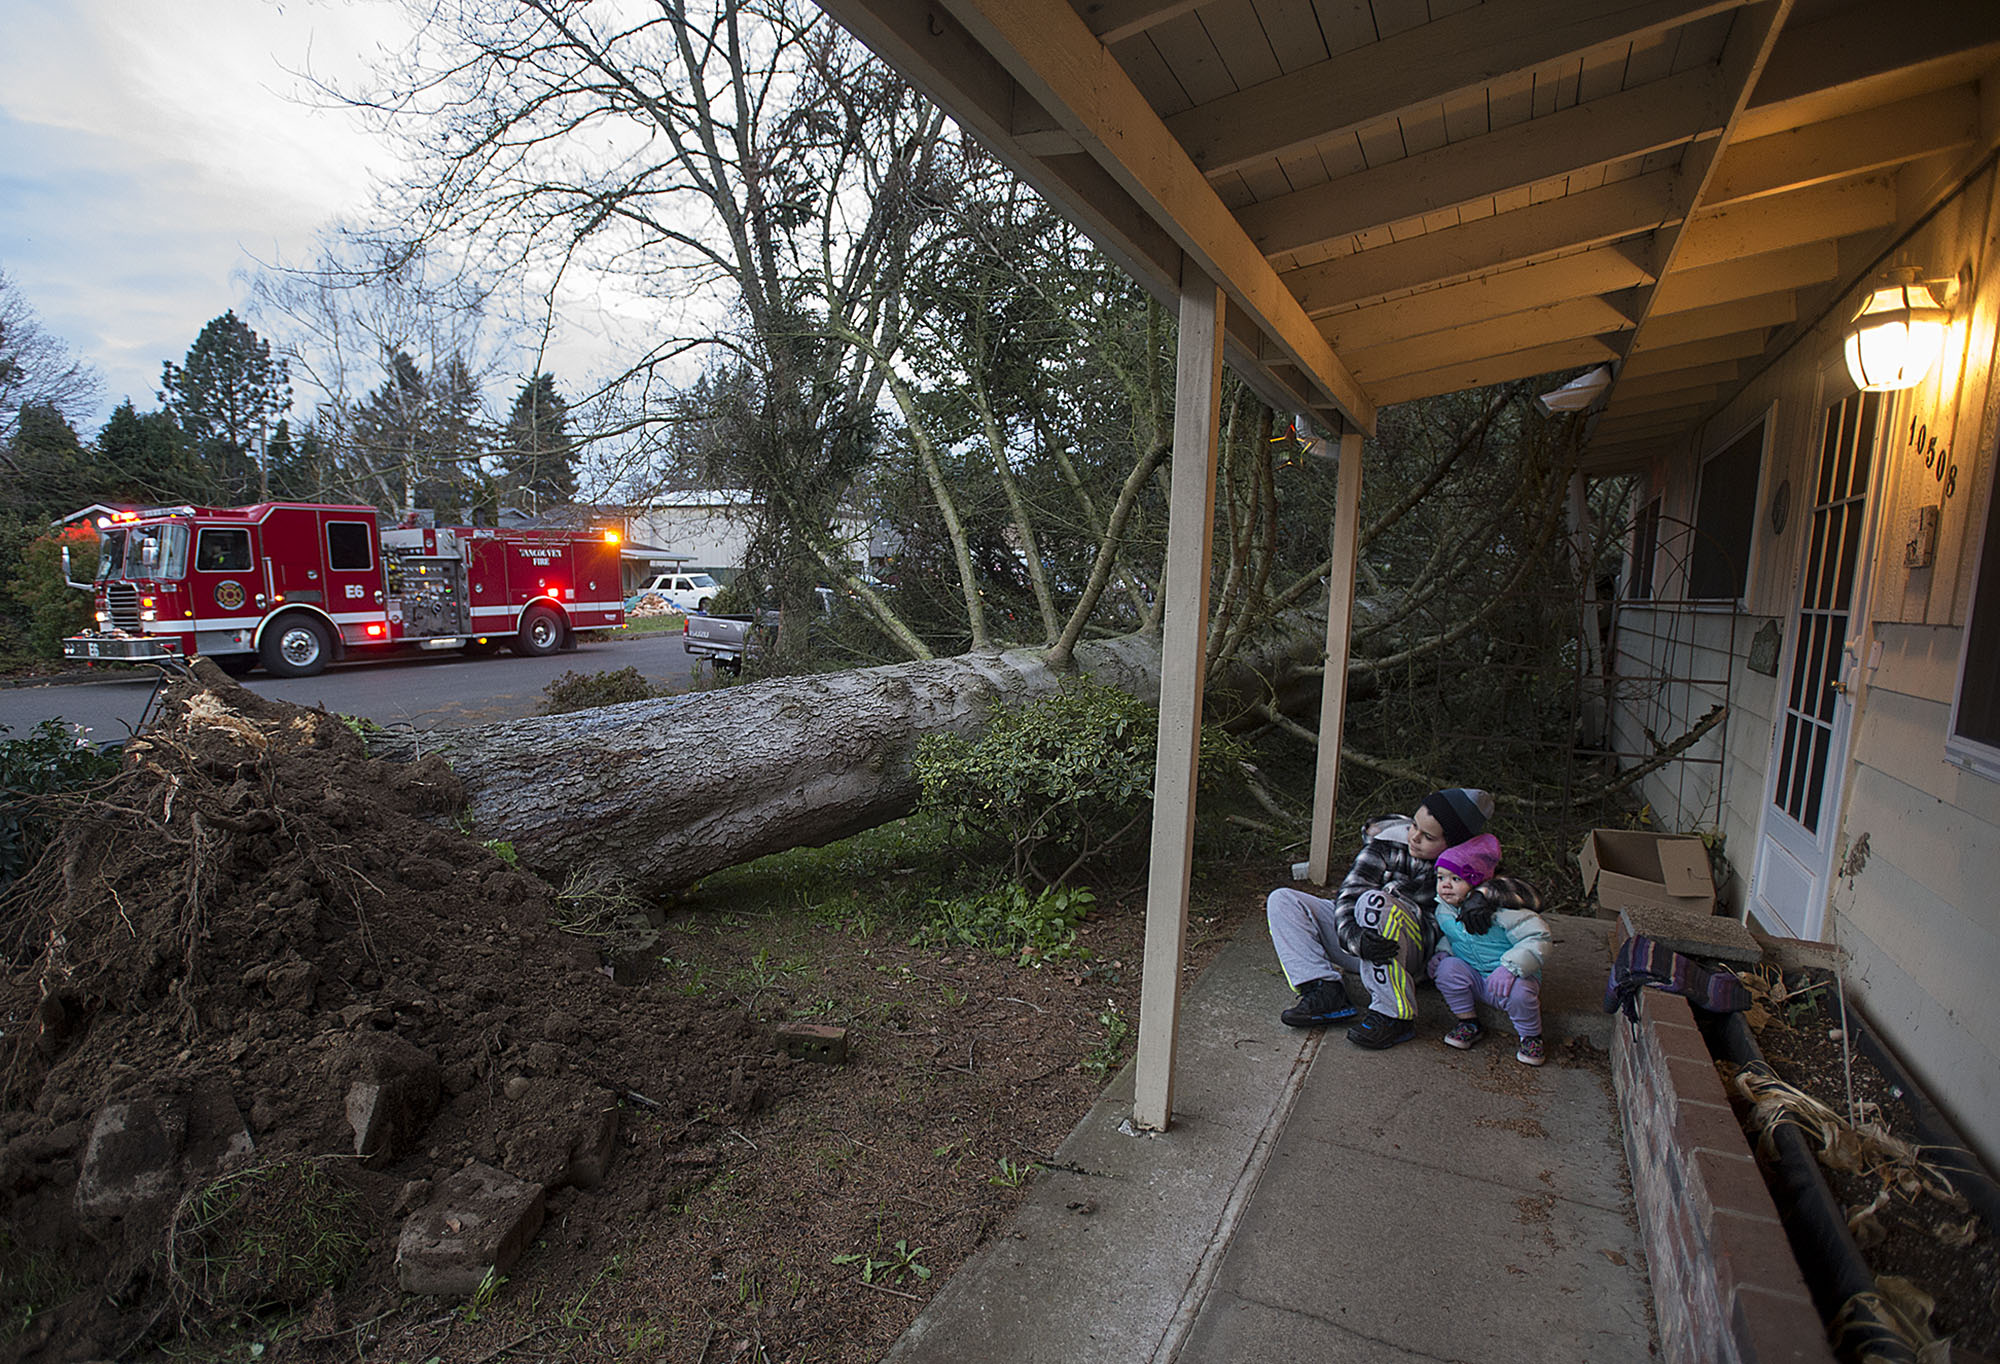 Elijah Deere, 10, left, and his sister, Aliyah Deere, 3, look over a tree that fell in the front yard of their house along Northeast 11th Street on Thursday morning, Dec. 8, 2016.